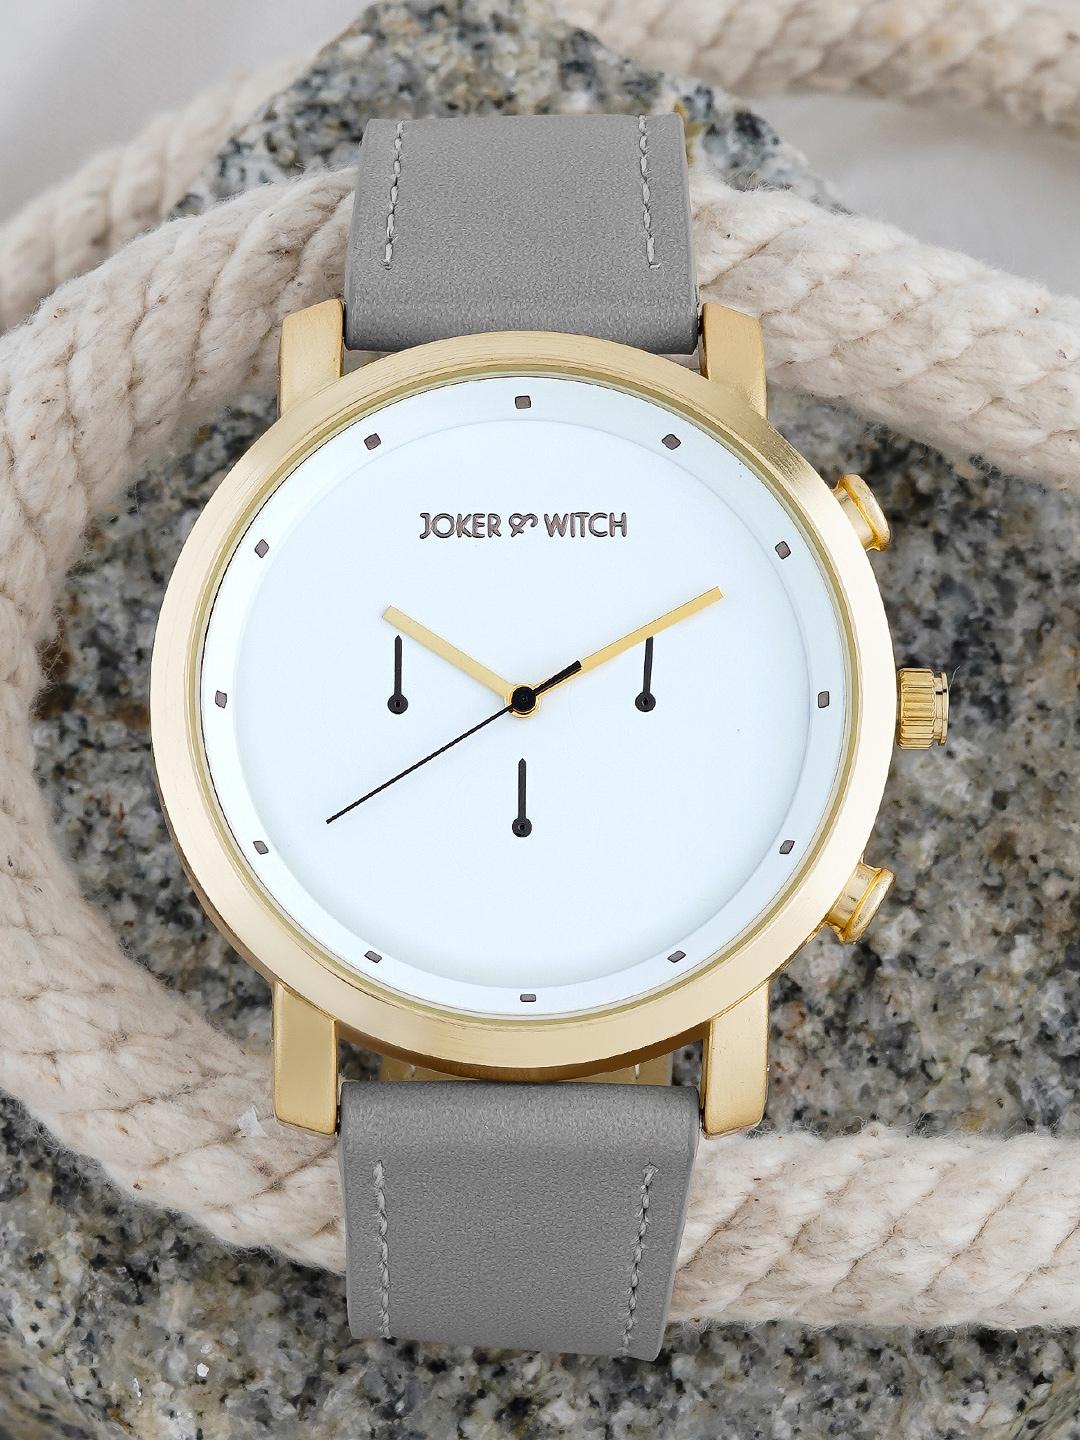 joker-&-witch-men-white-embellished-dial-&-grey-leather-bracelet-style-straps-analogue-watch